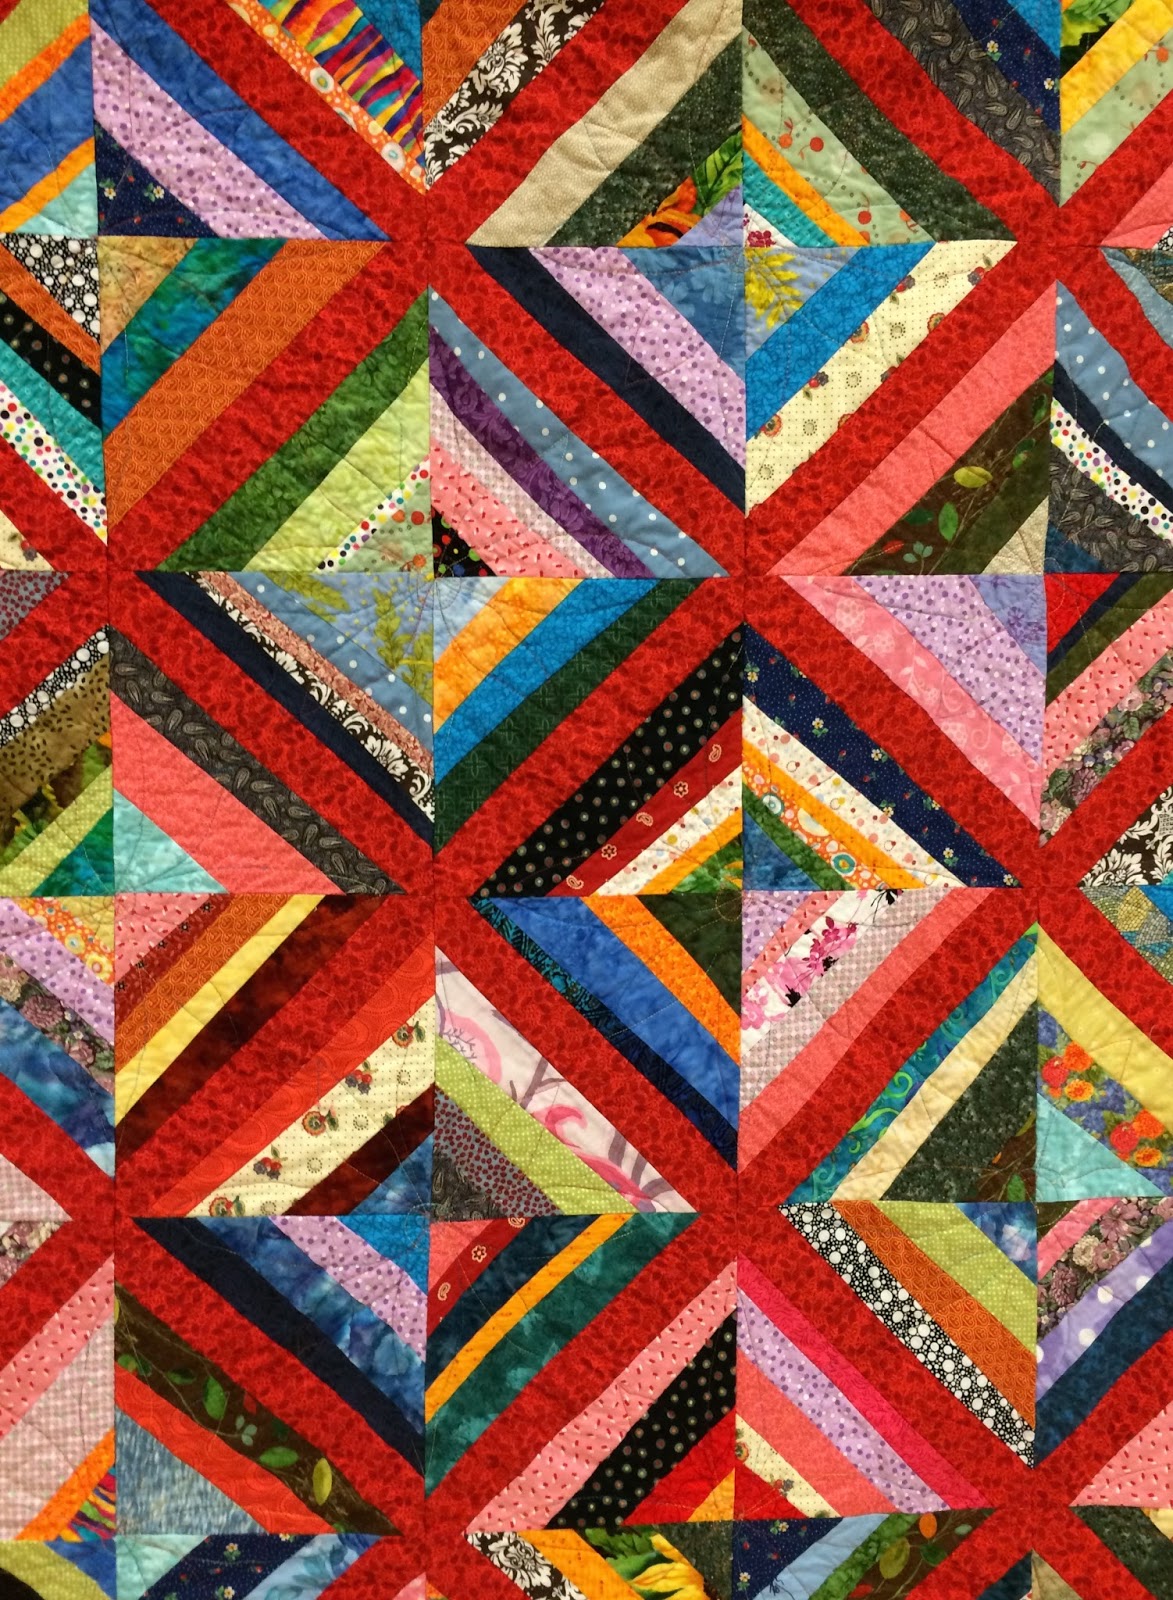 PamelaQuilts: Friday Finishes - Scrappy Strip quilt!